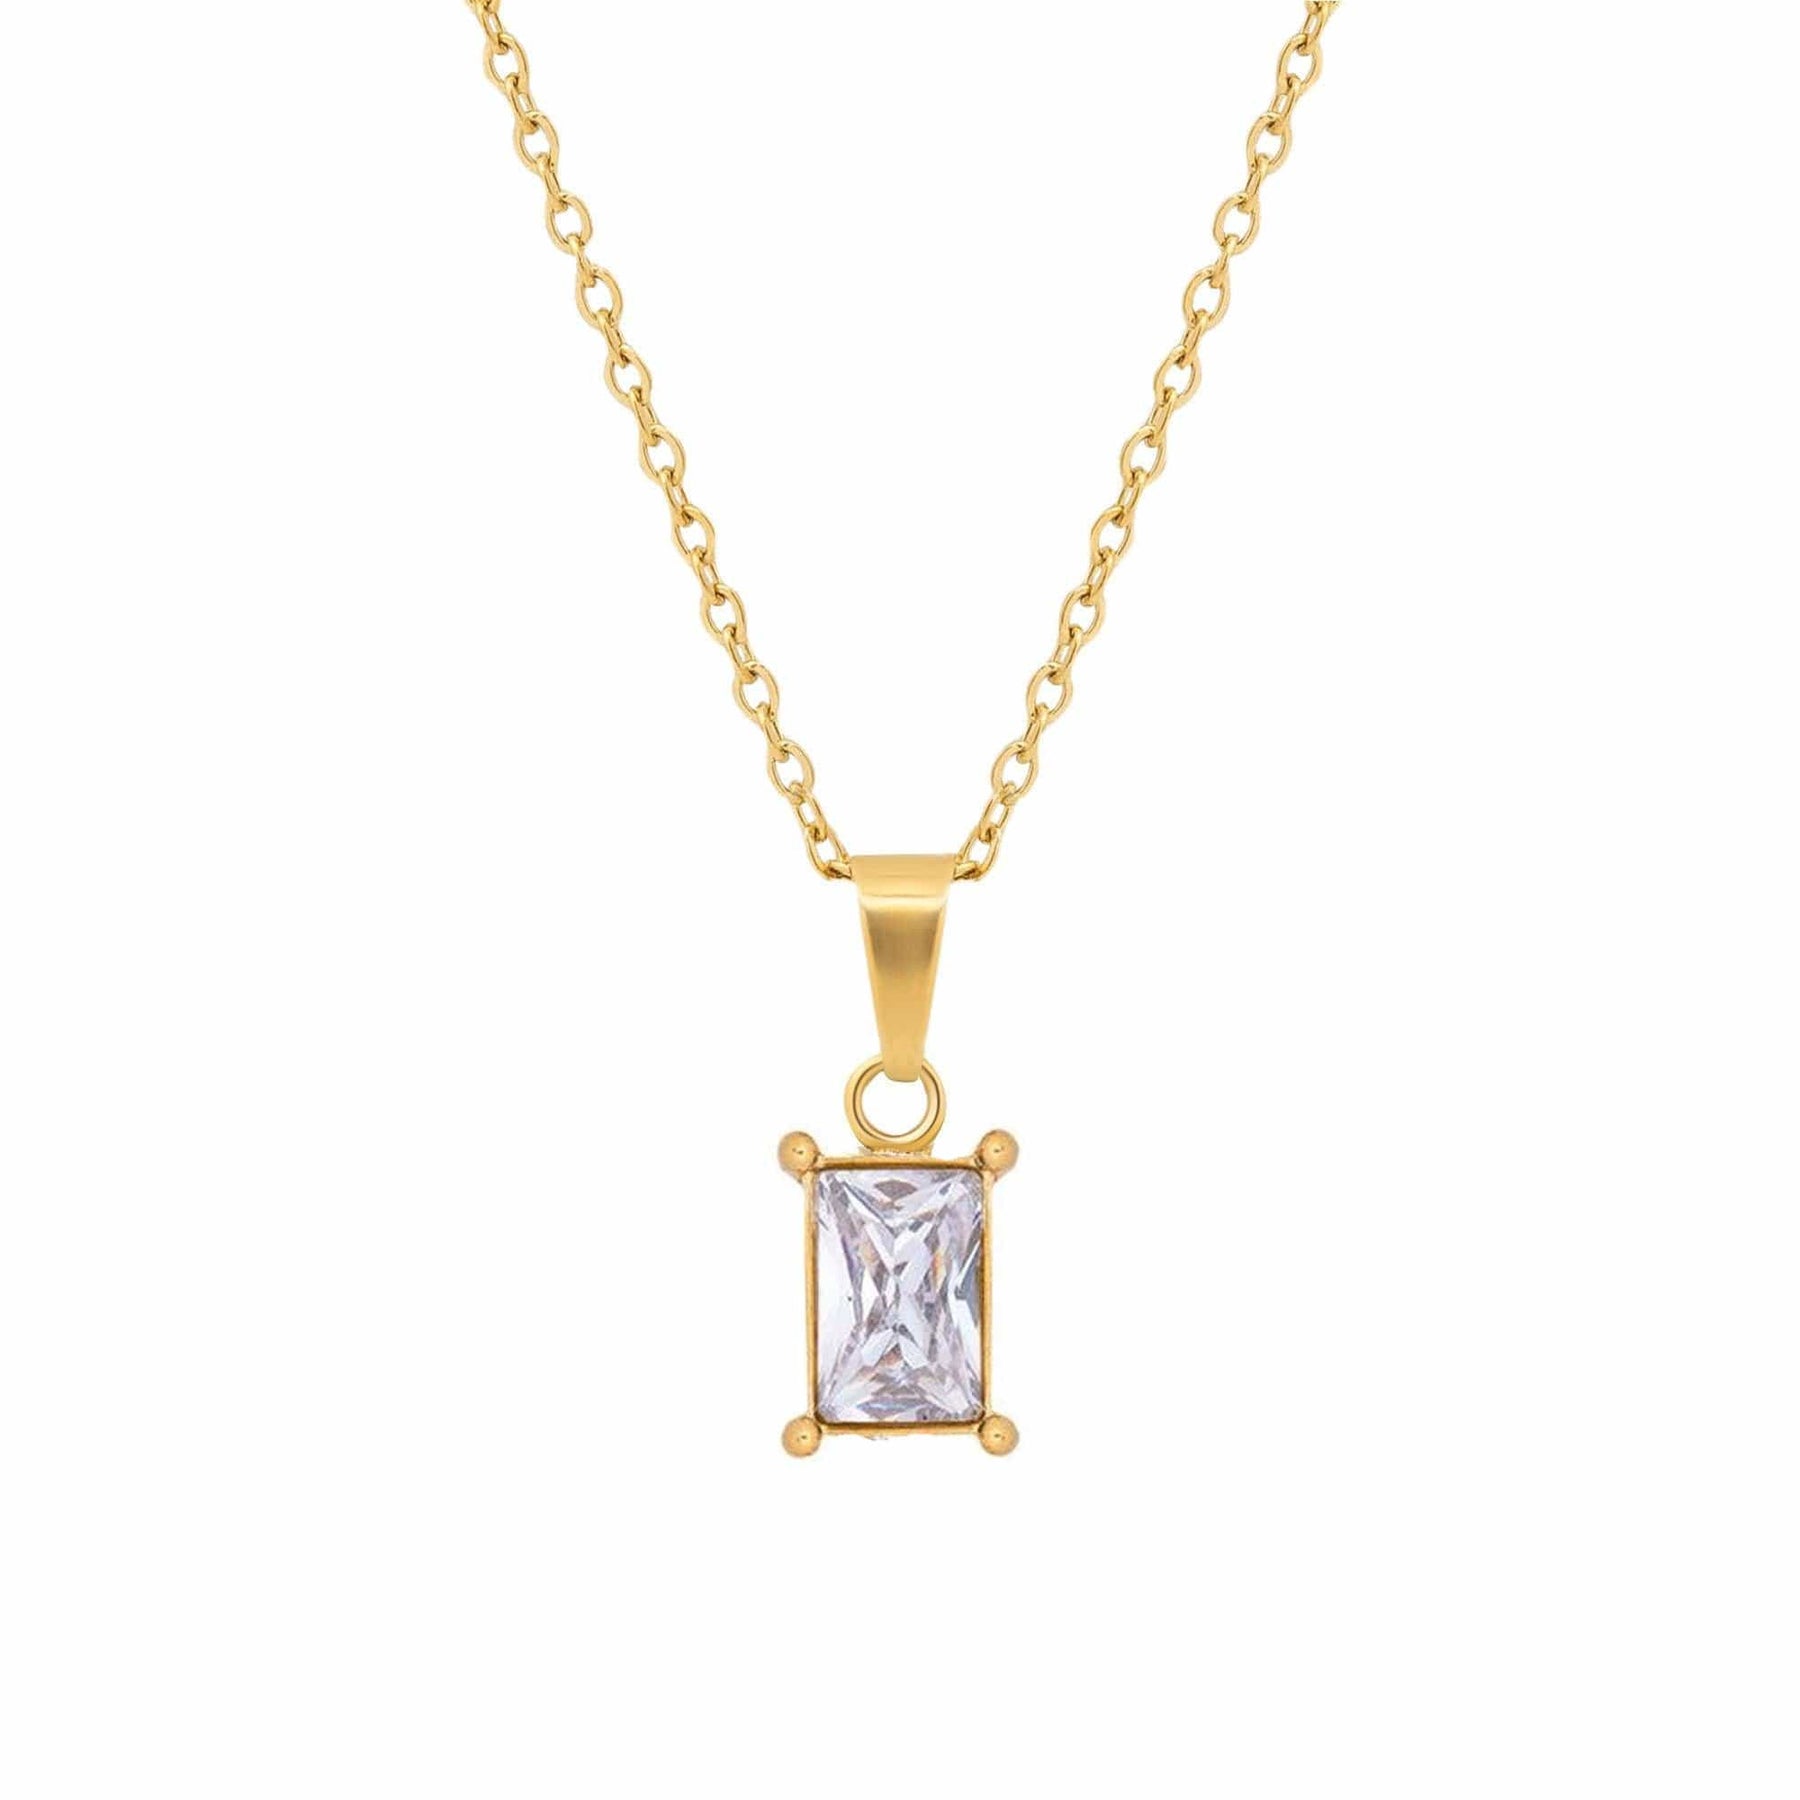 BohoMoon Stainless Steel Alma Necklace Gold / White